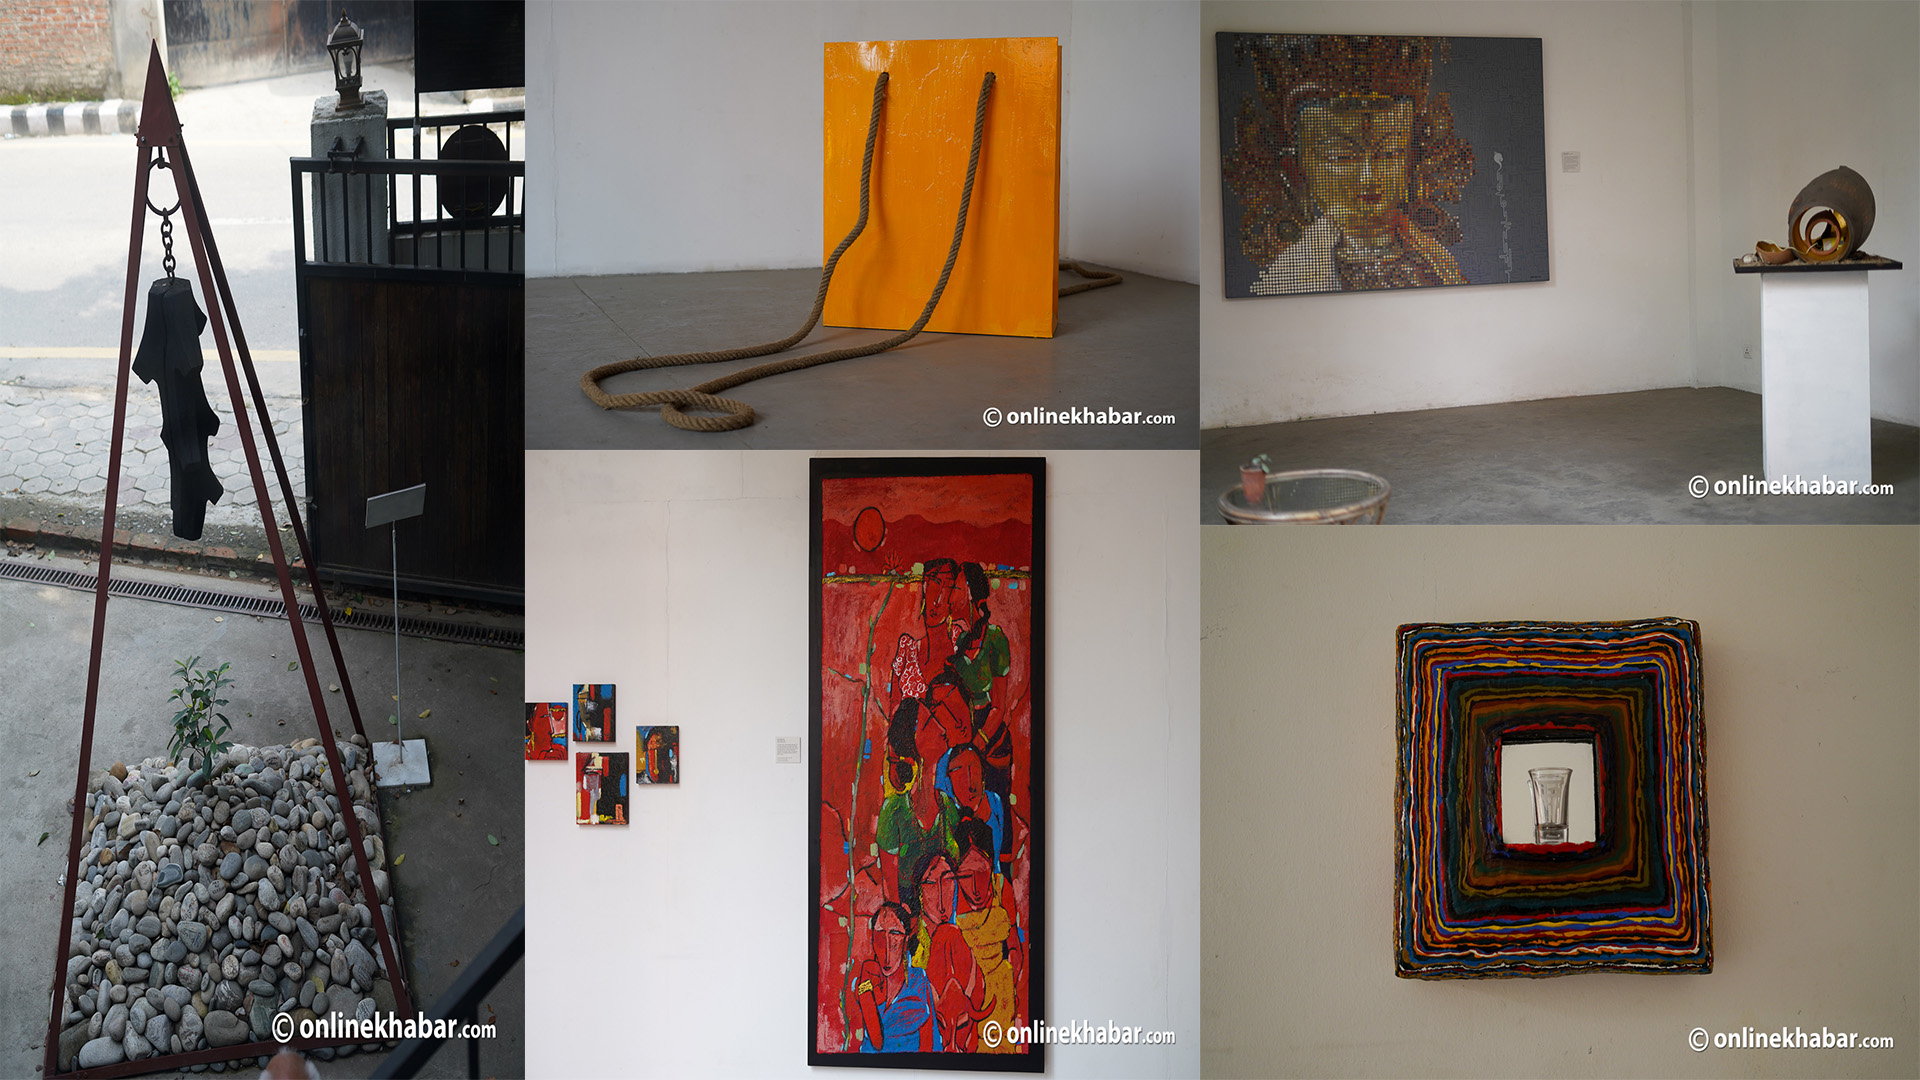 Parallel History on display at MCube Gallery, Patan.